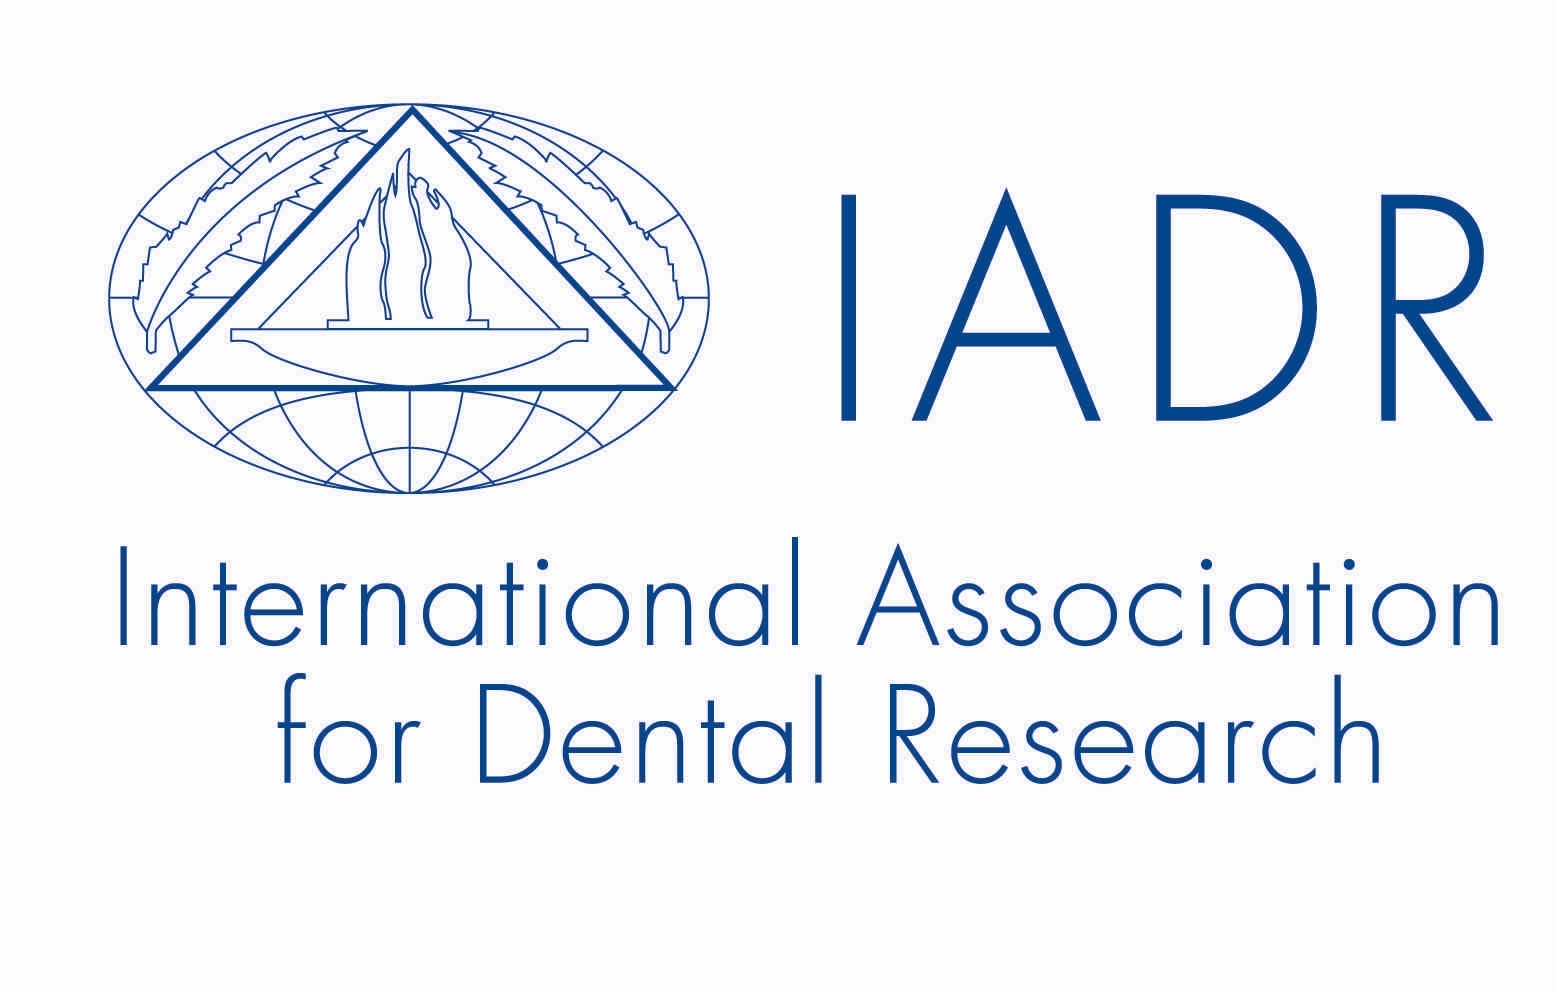 Summer Research Programs For Dental Students